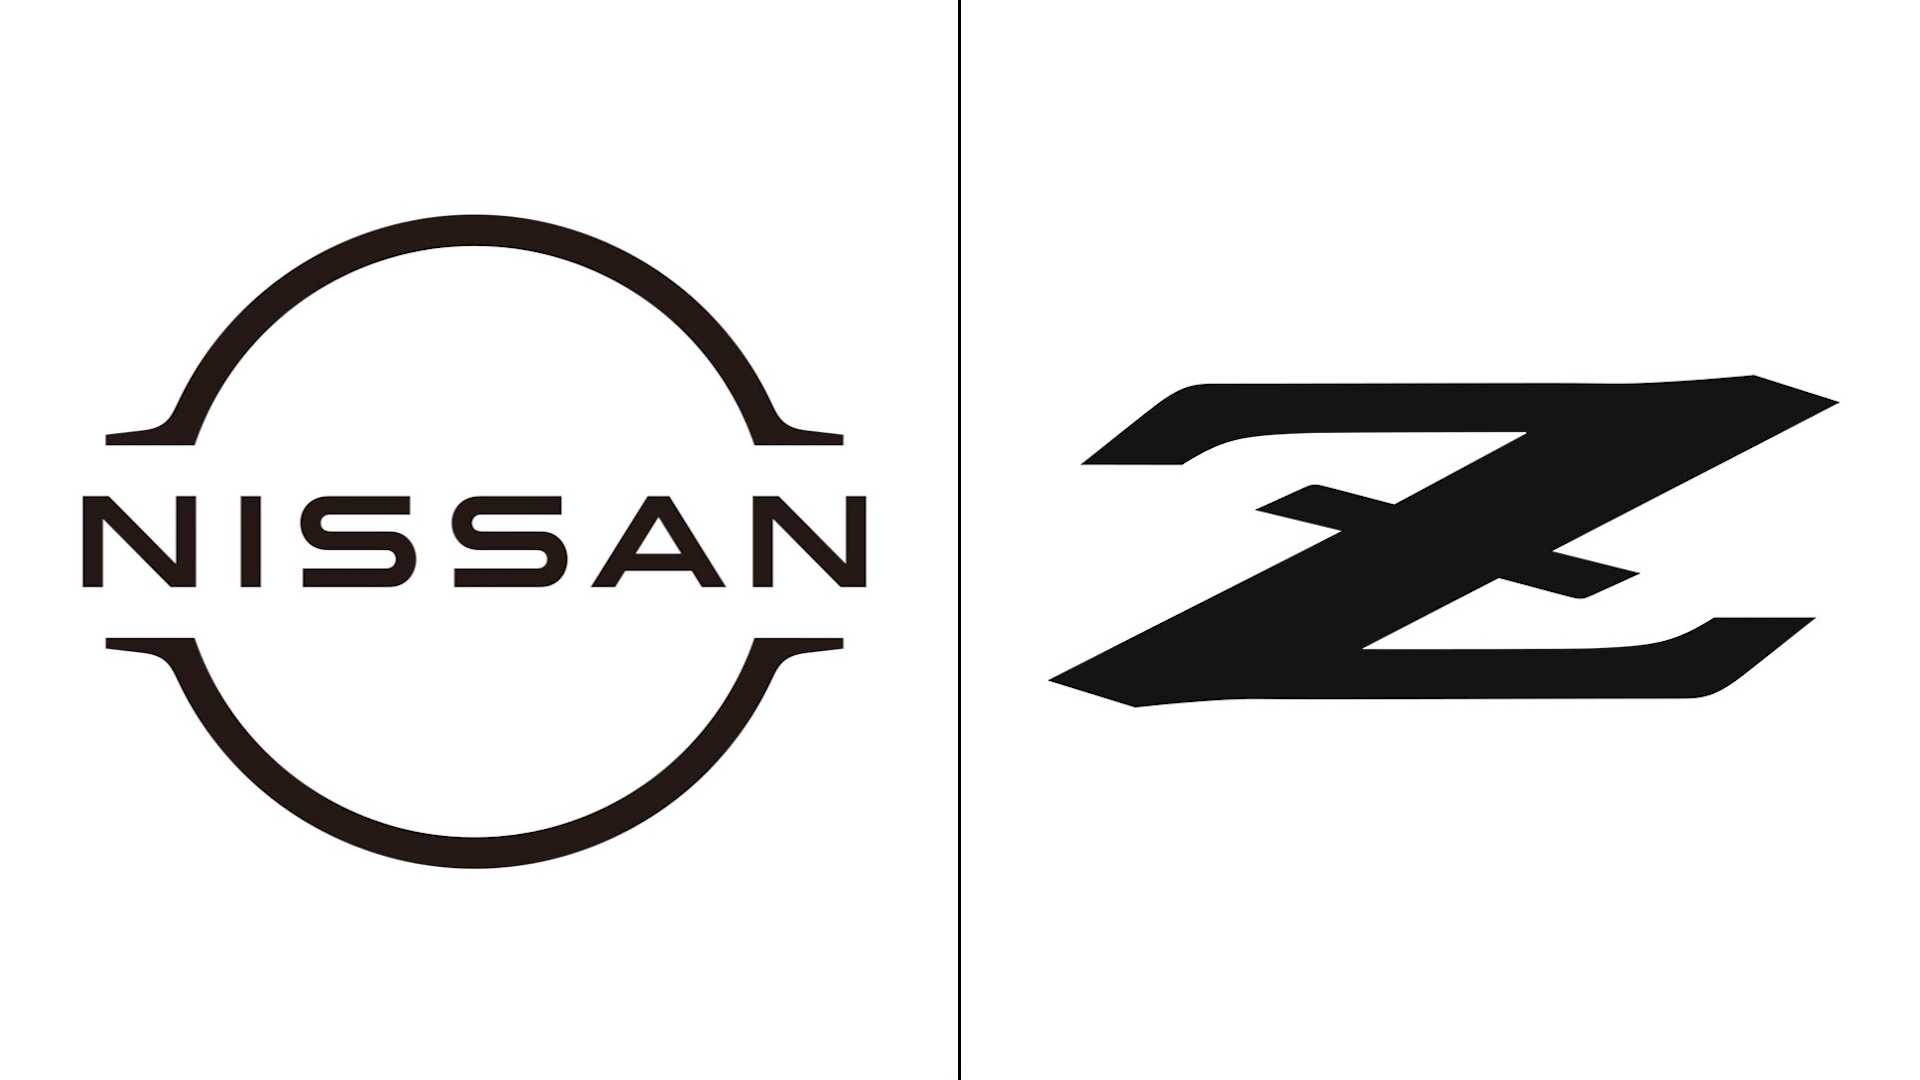 Nissan Trademarks Suggest New Company Logo And Z Sports Car